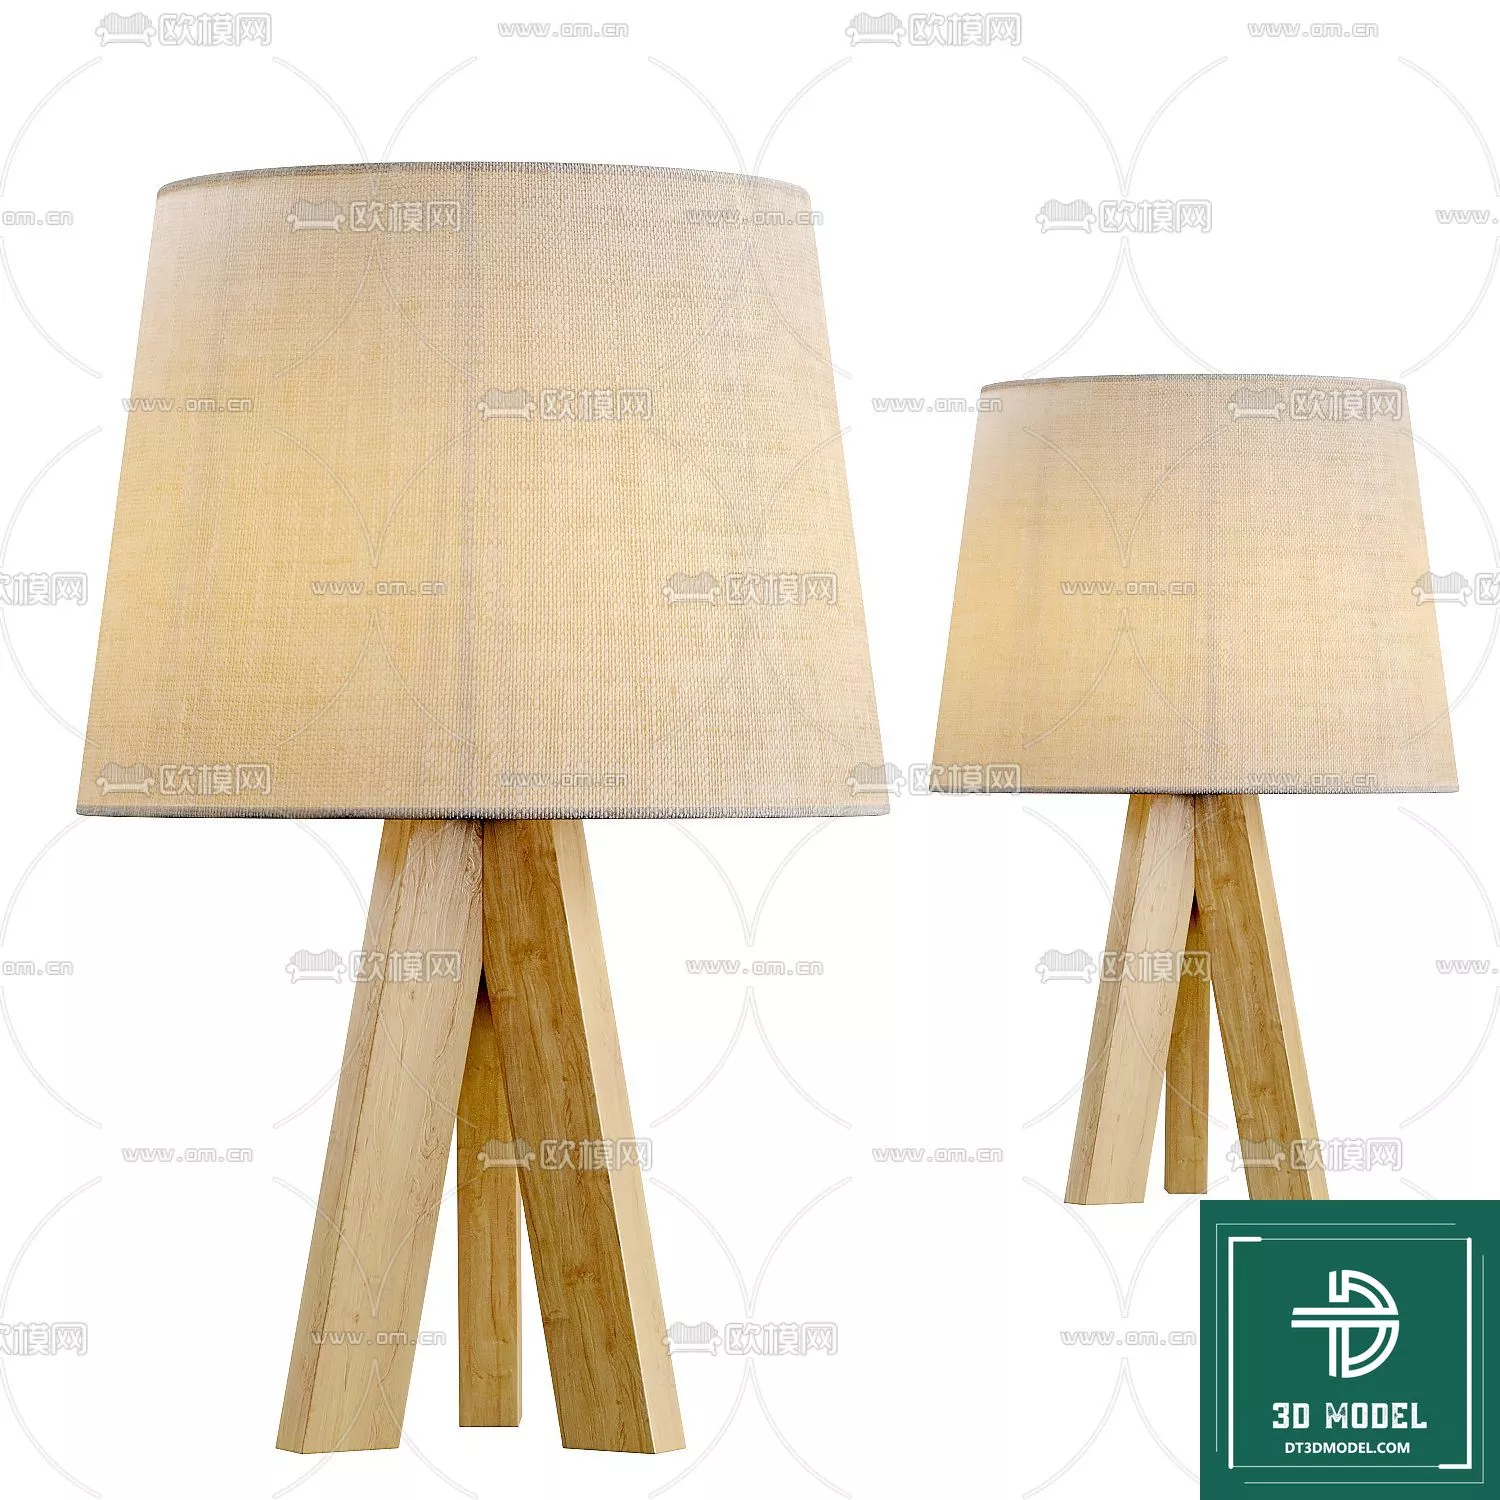 MODERN TABLE LAMP - SKETCHUP 3D MODEL - VRAY OR ENSCAPE - ID14521